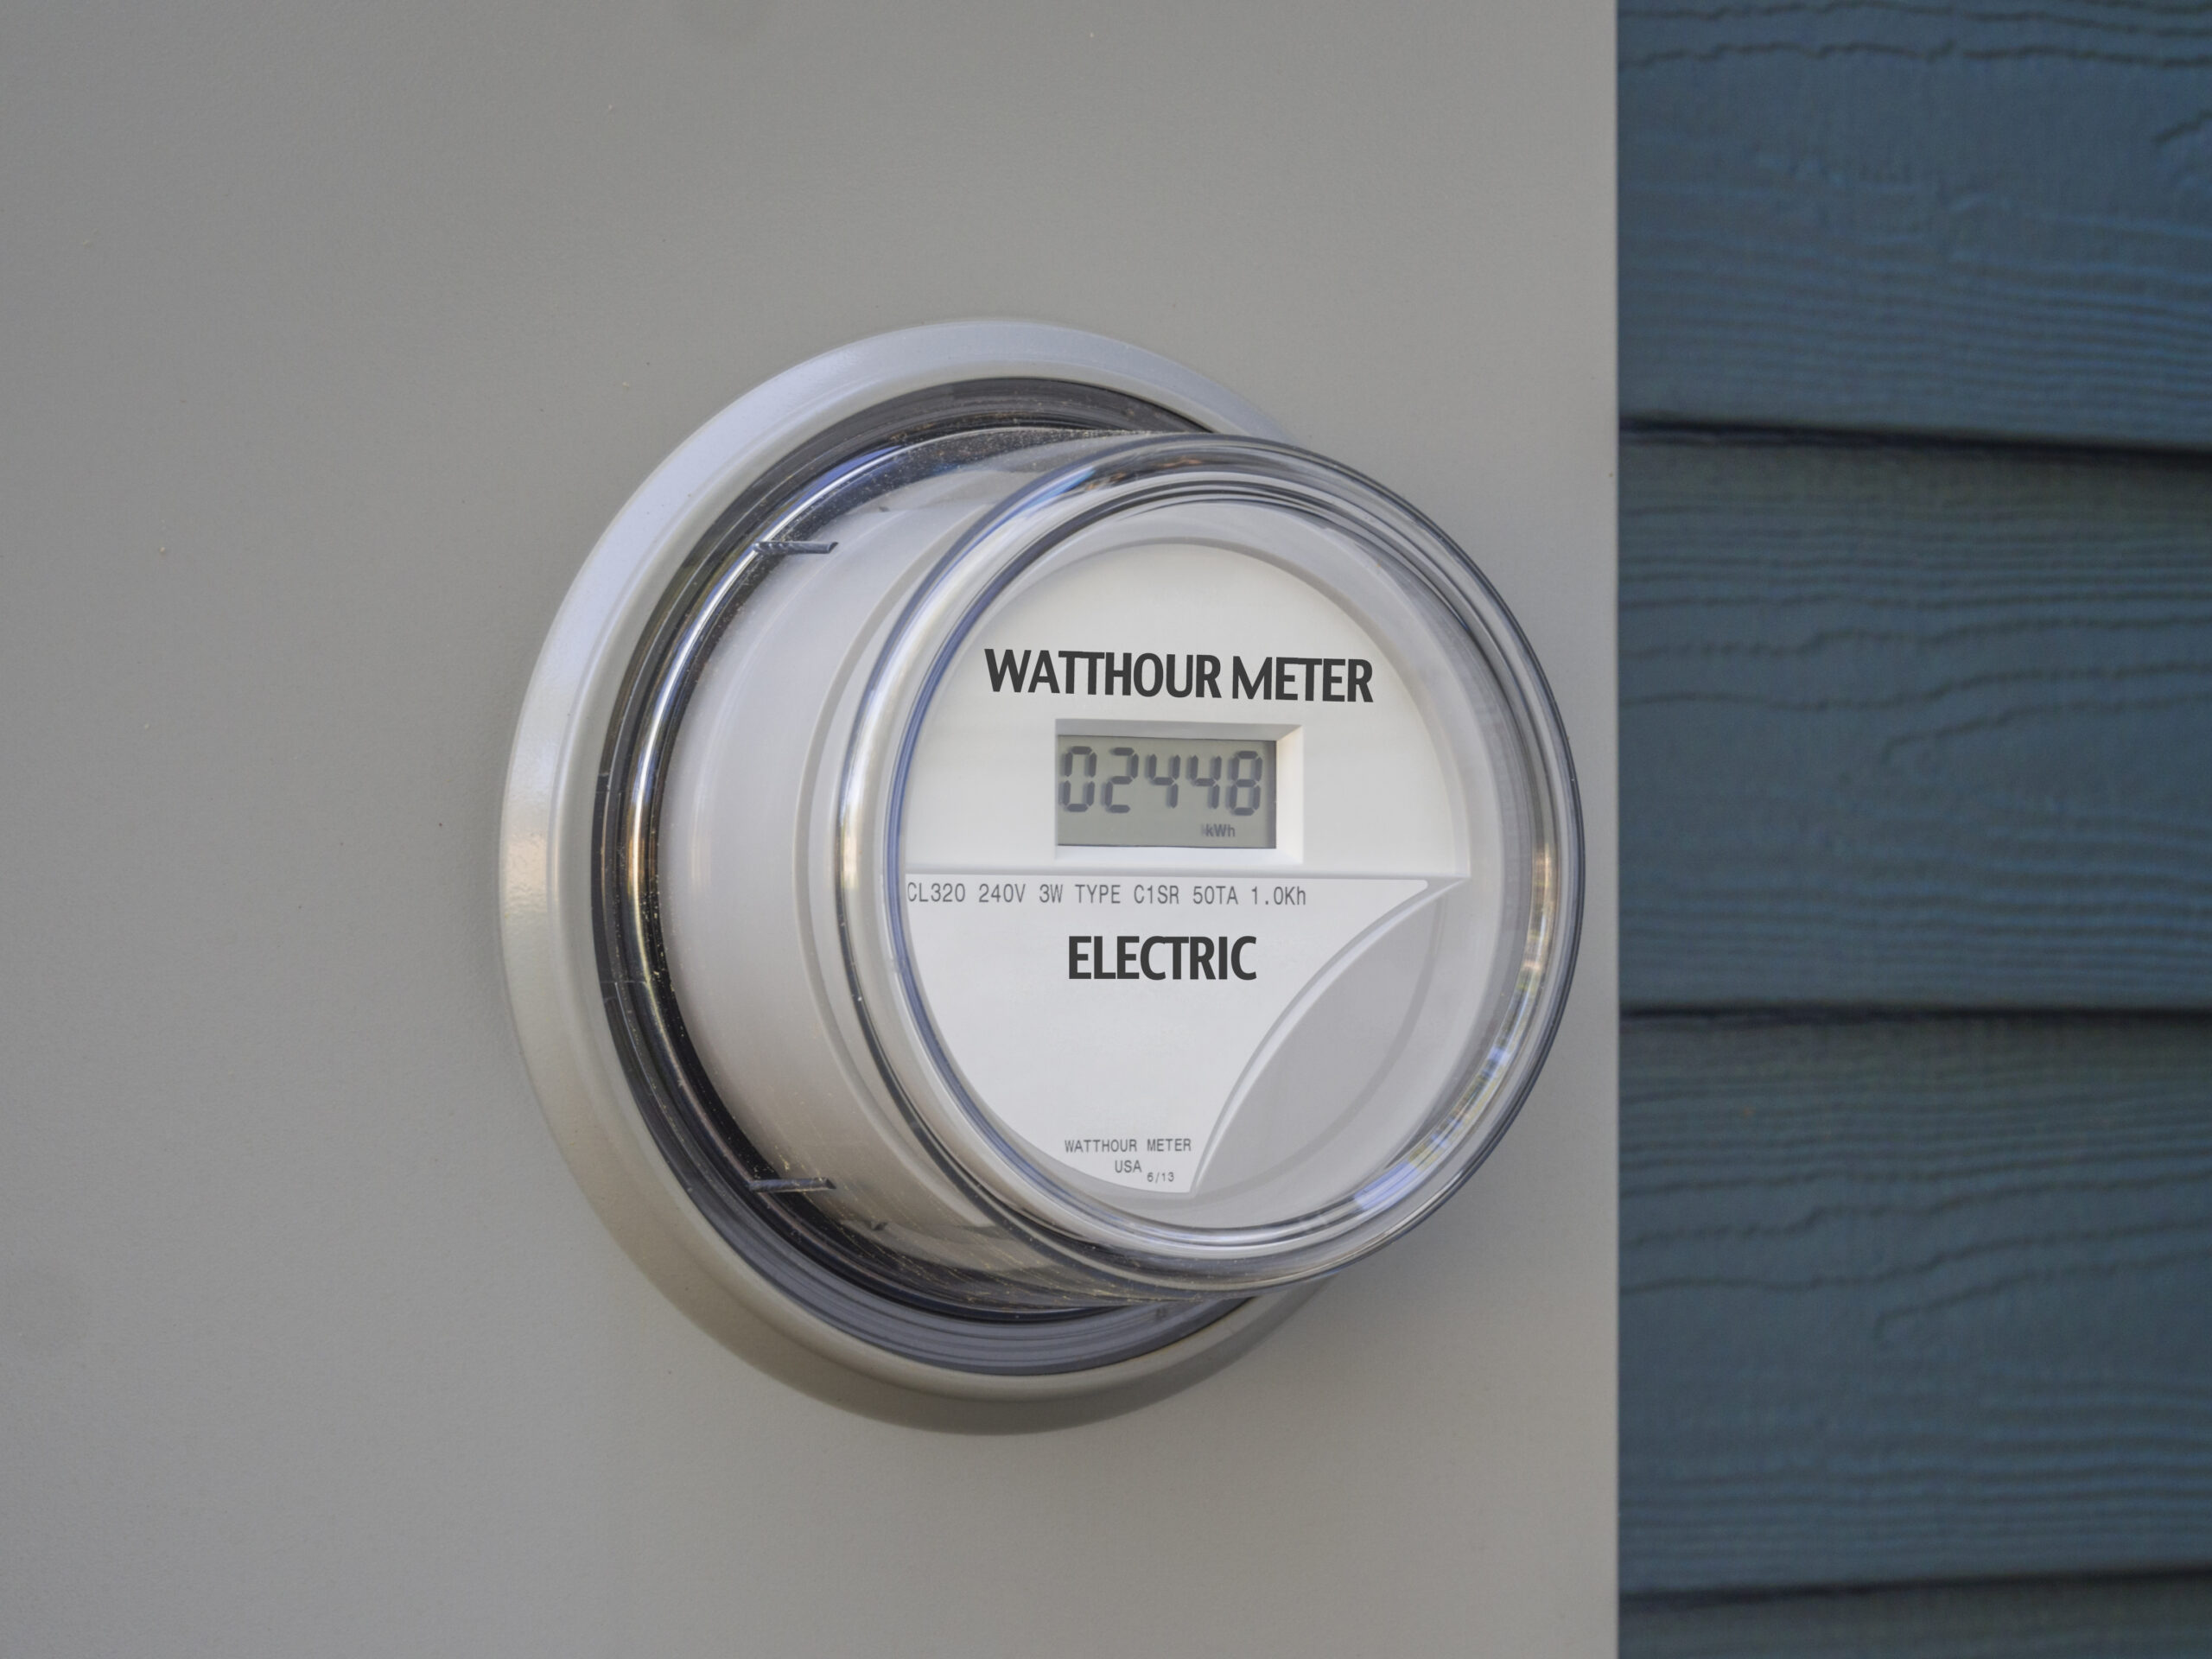 Smart Meters Cause Changes To The Heart